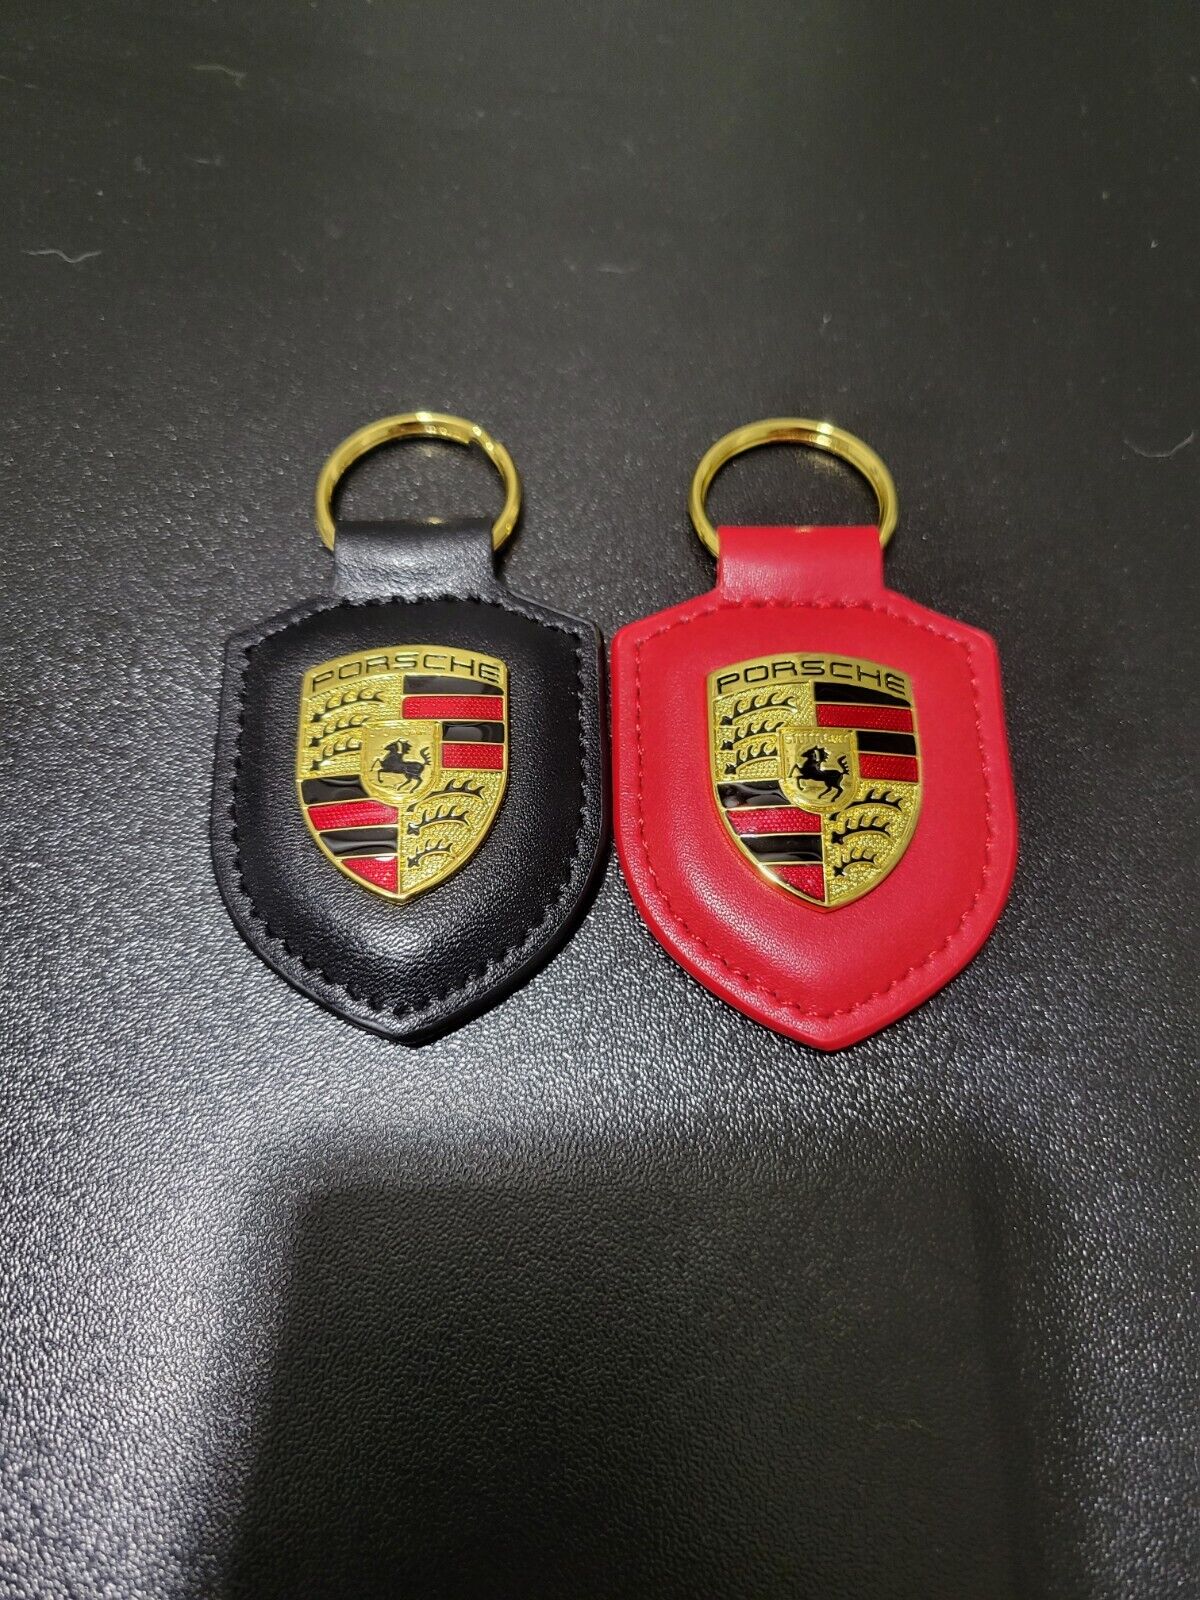 Porsche Keychain Combo Red And Black For The Price Of One Key Chain Key Ring